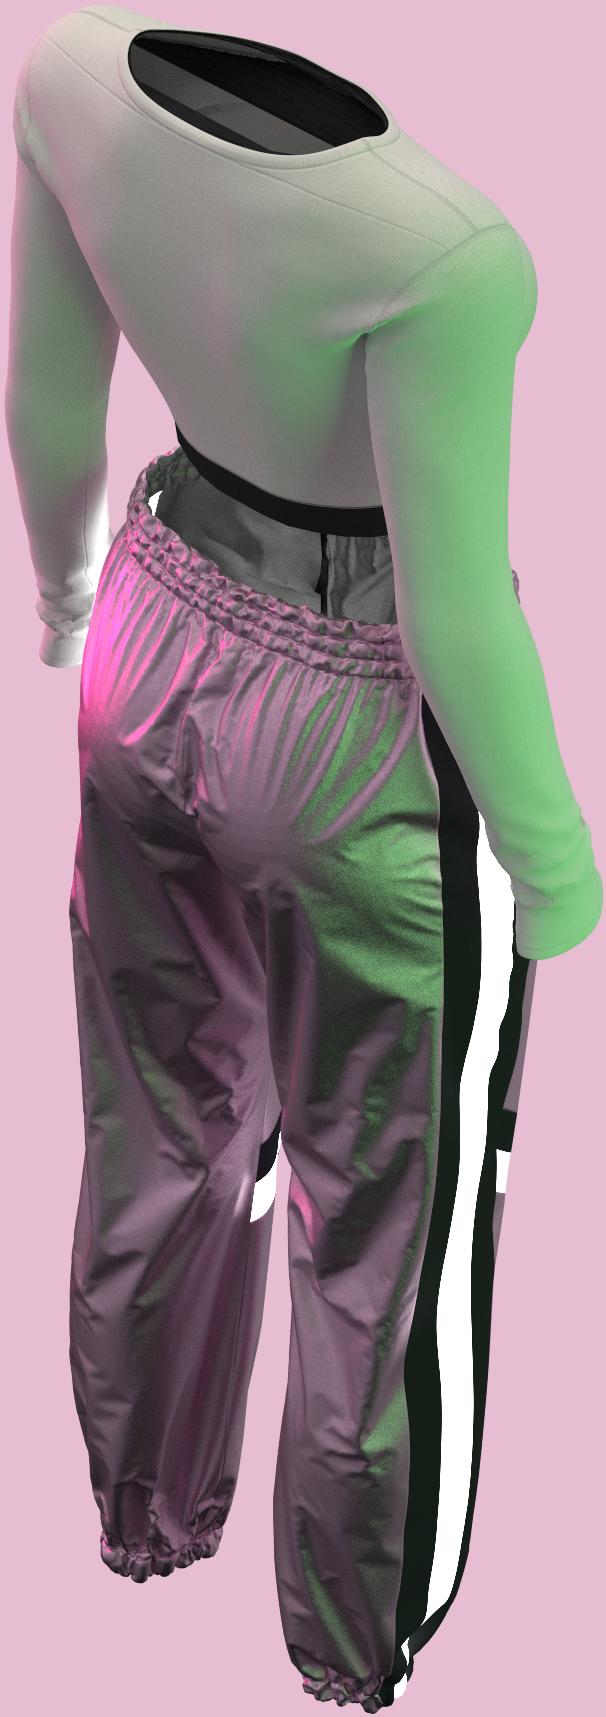 Reflective_Jogger_and_Crop_Top_Closet_Library_Fabric__Colorway_A_Copy_9_0.png